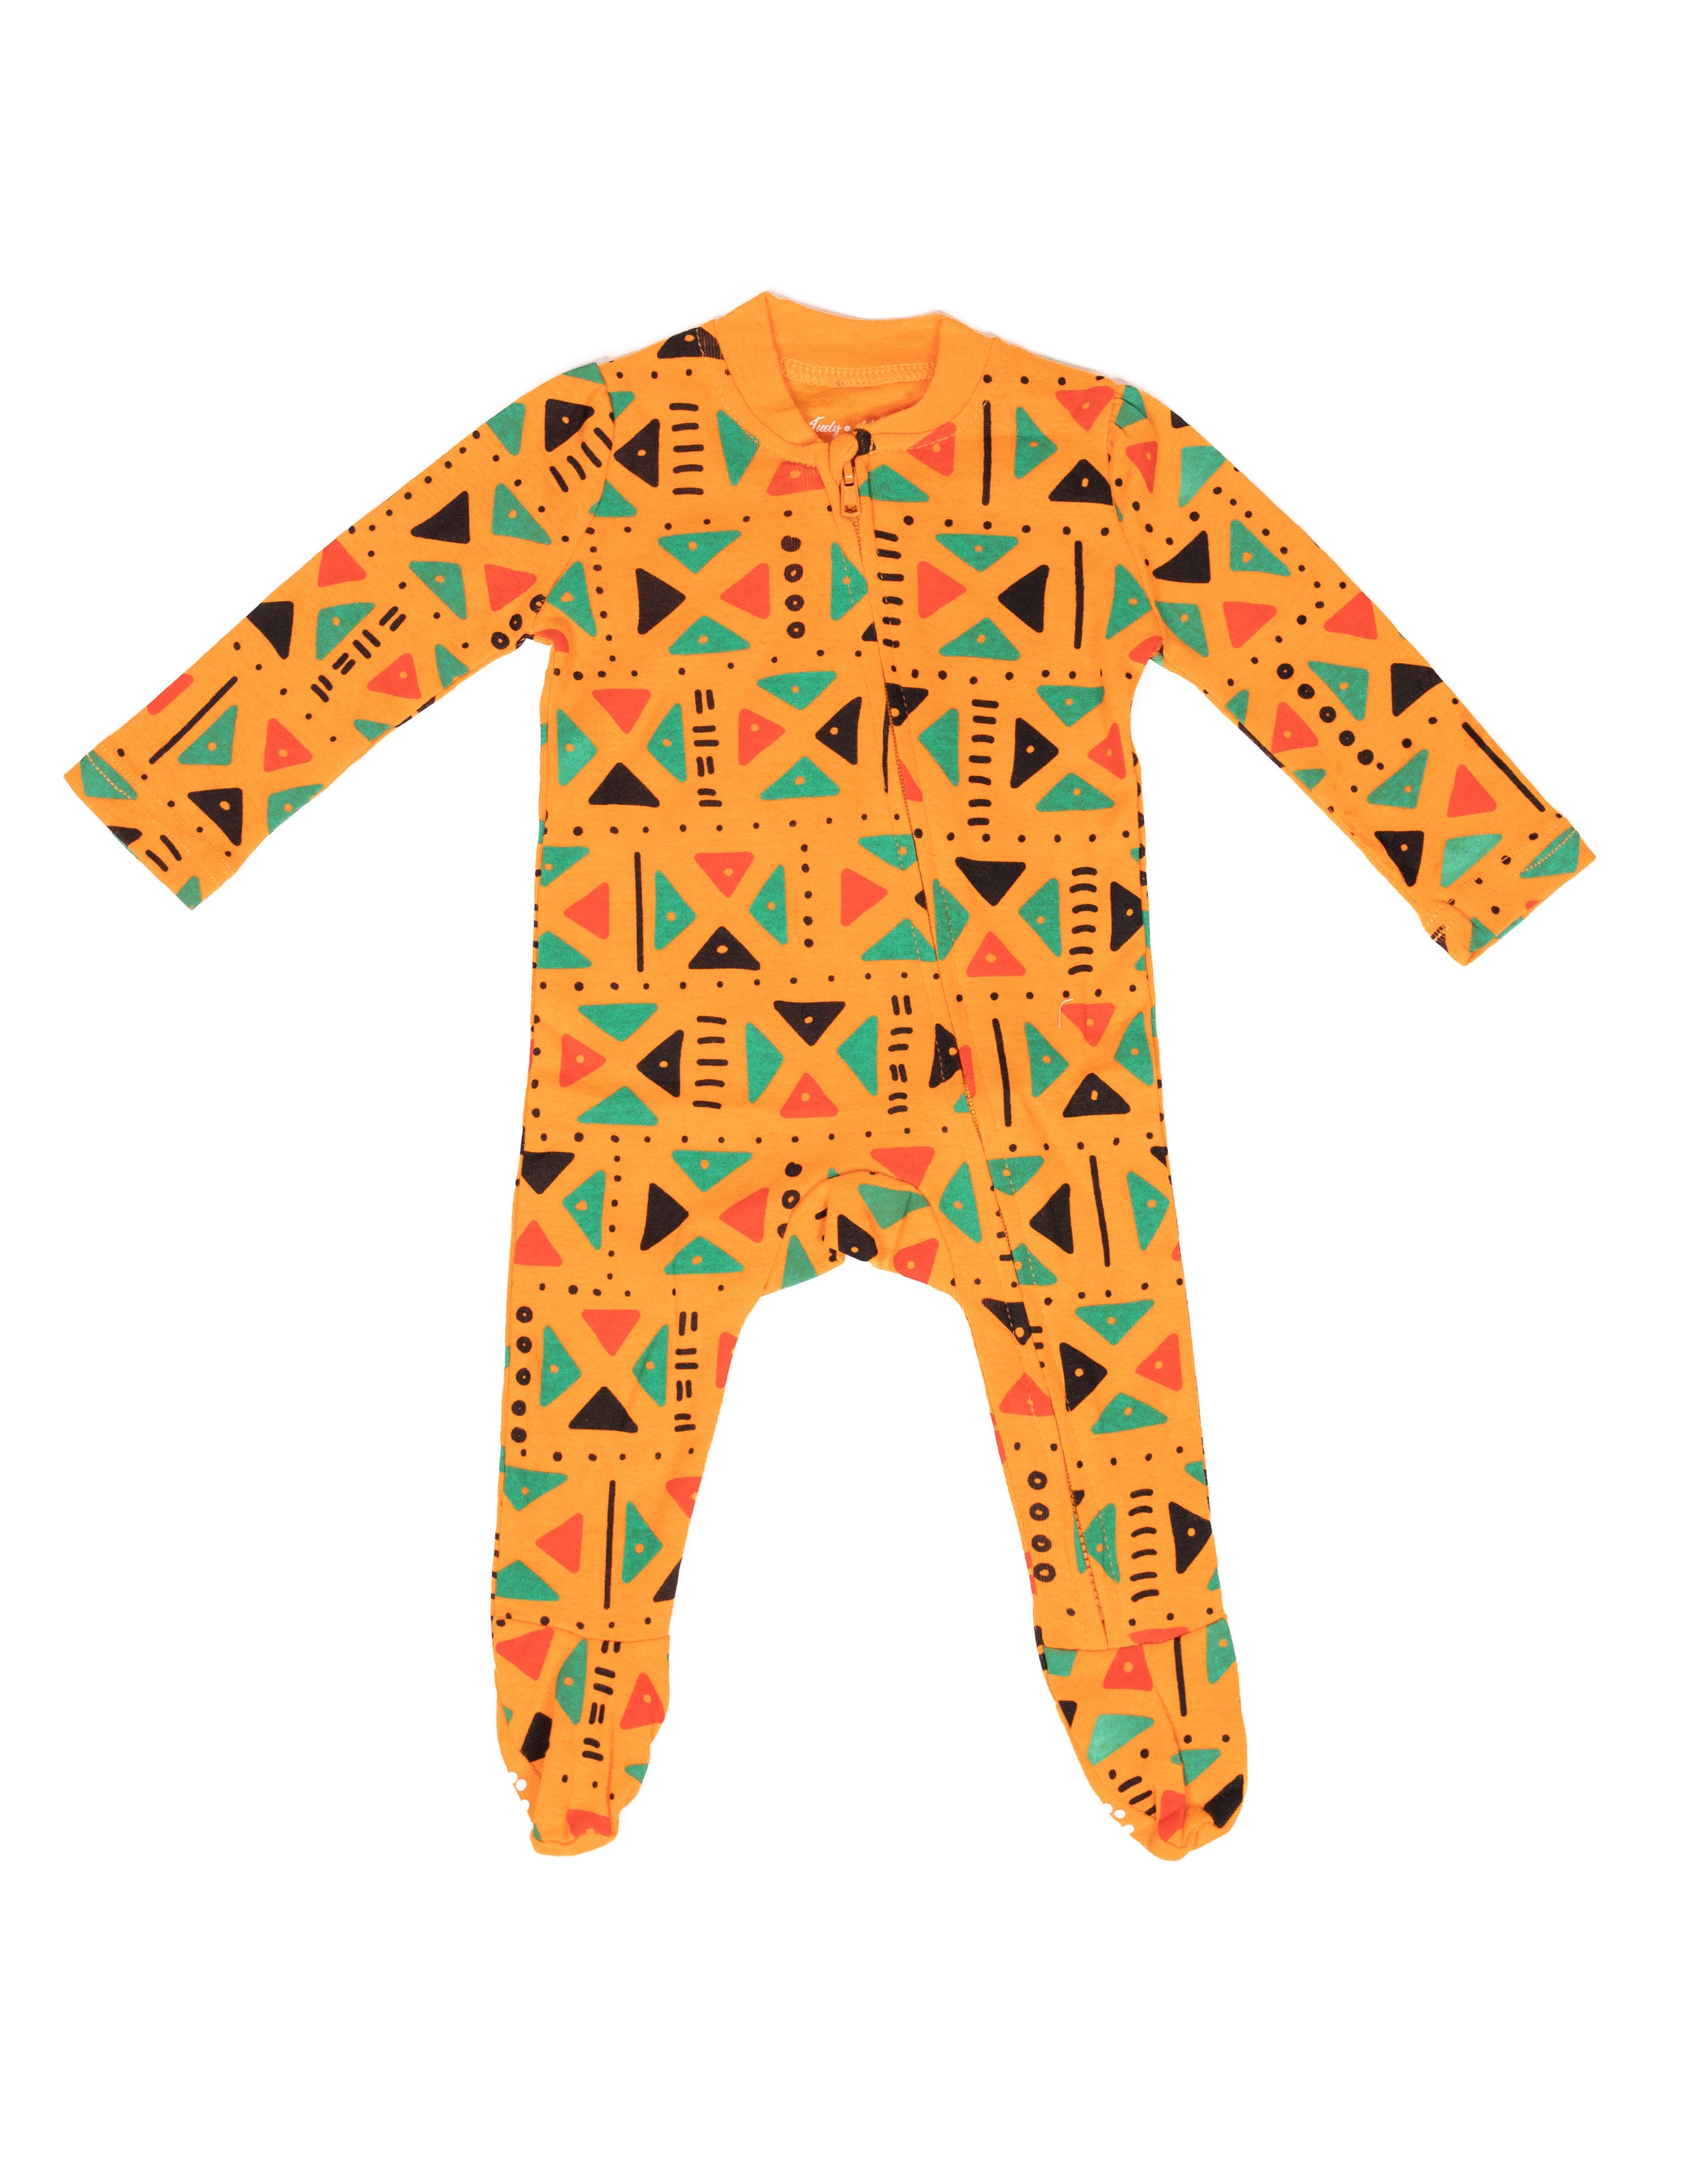 Afrocentric baby clothes